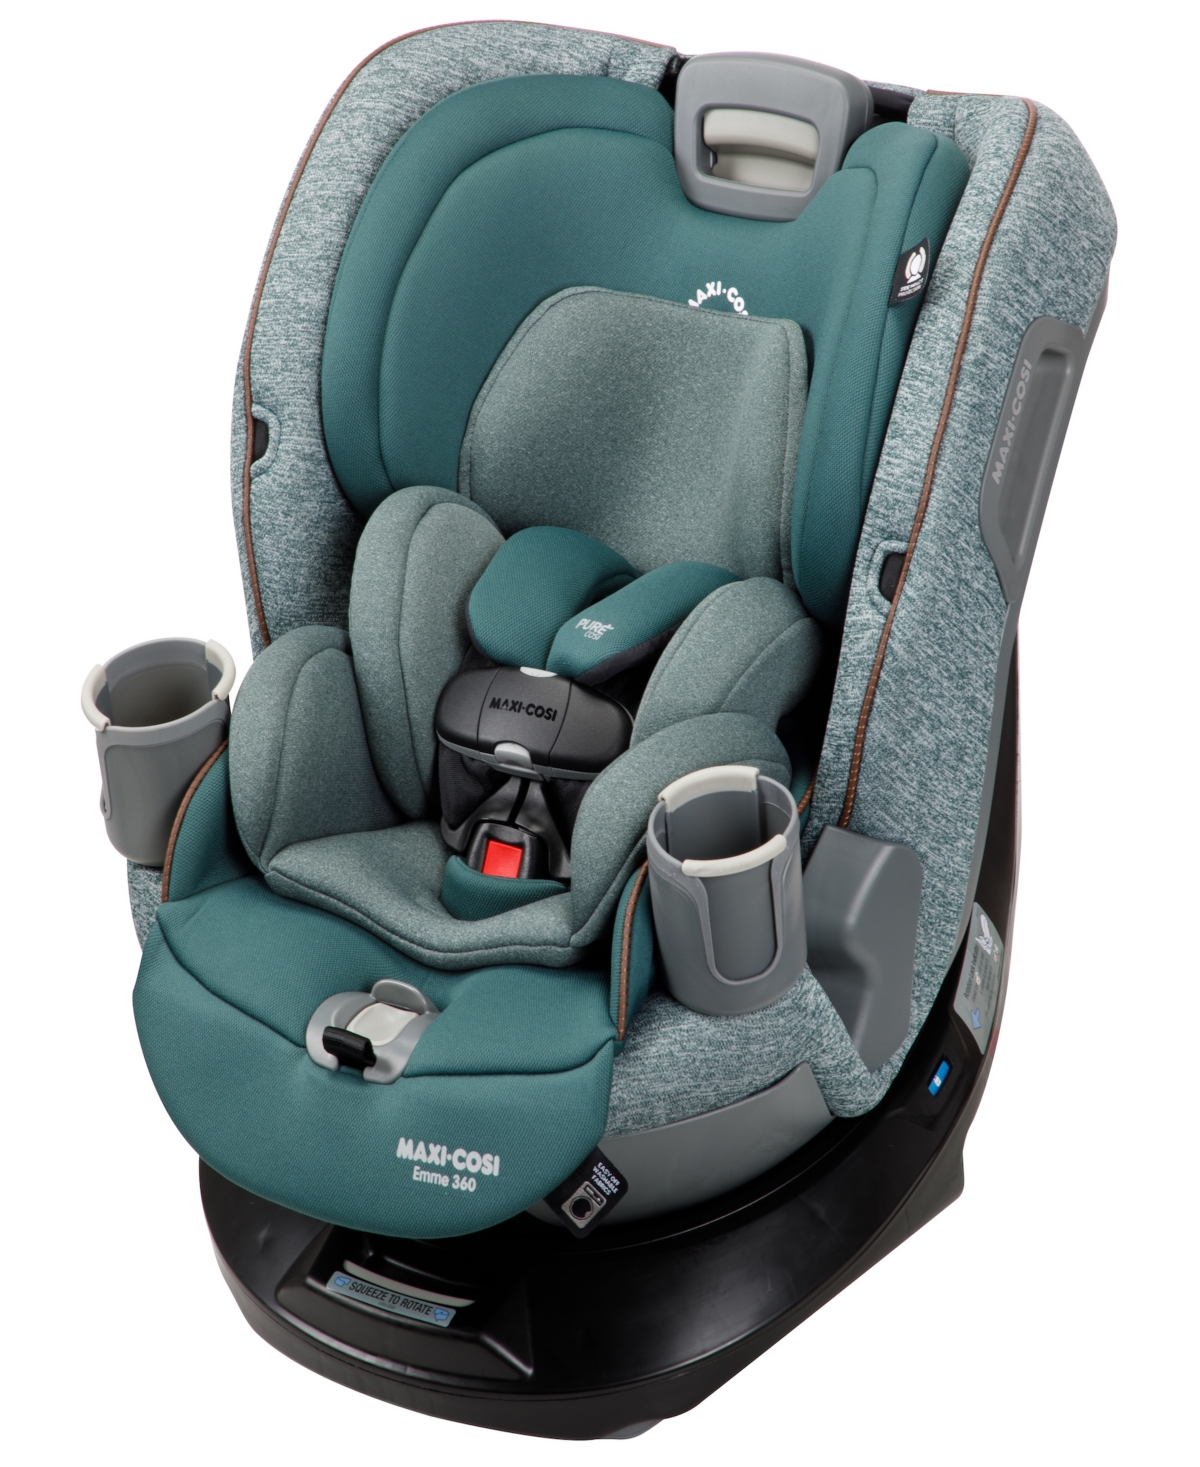 Maxi-cosi Baby Girls And Boys Emme Convertible Car Seat In Meadow Wonder